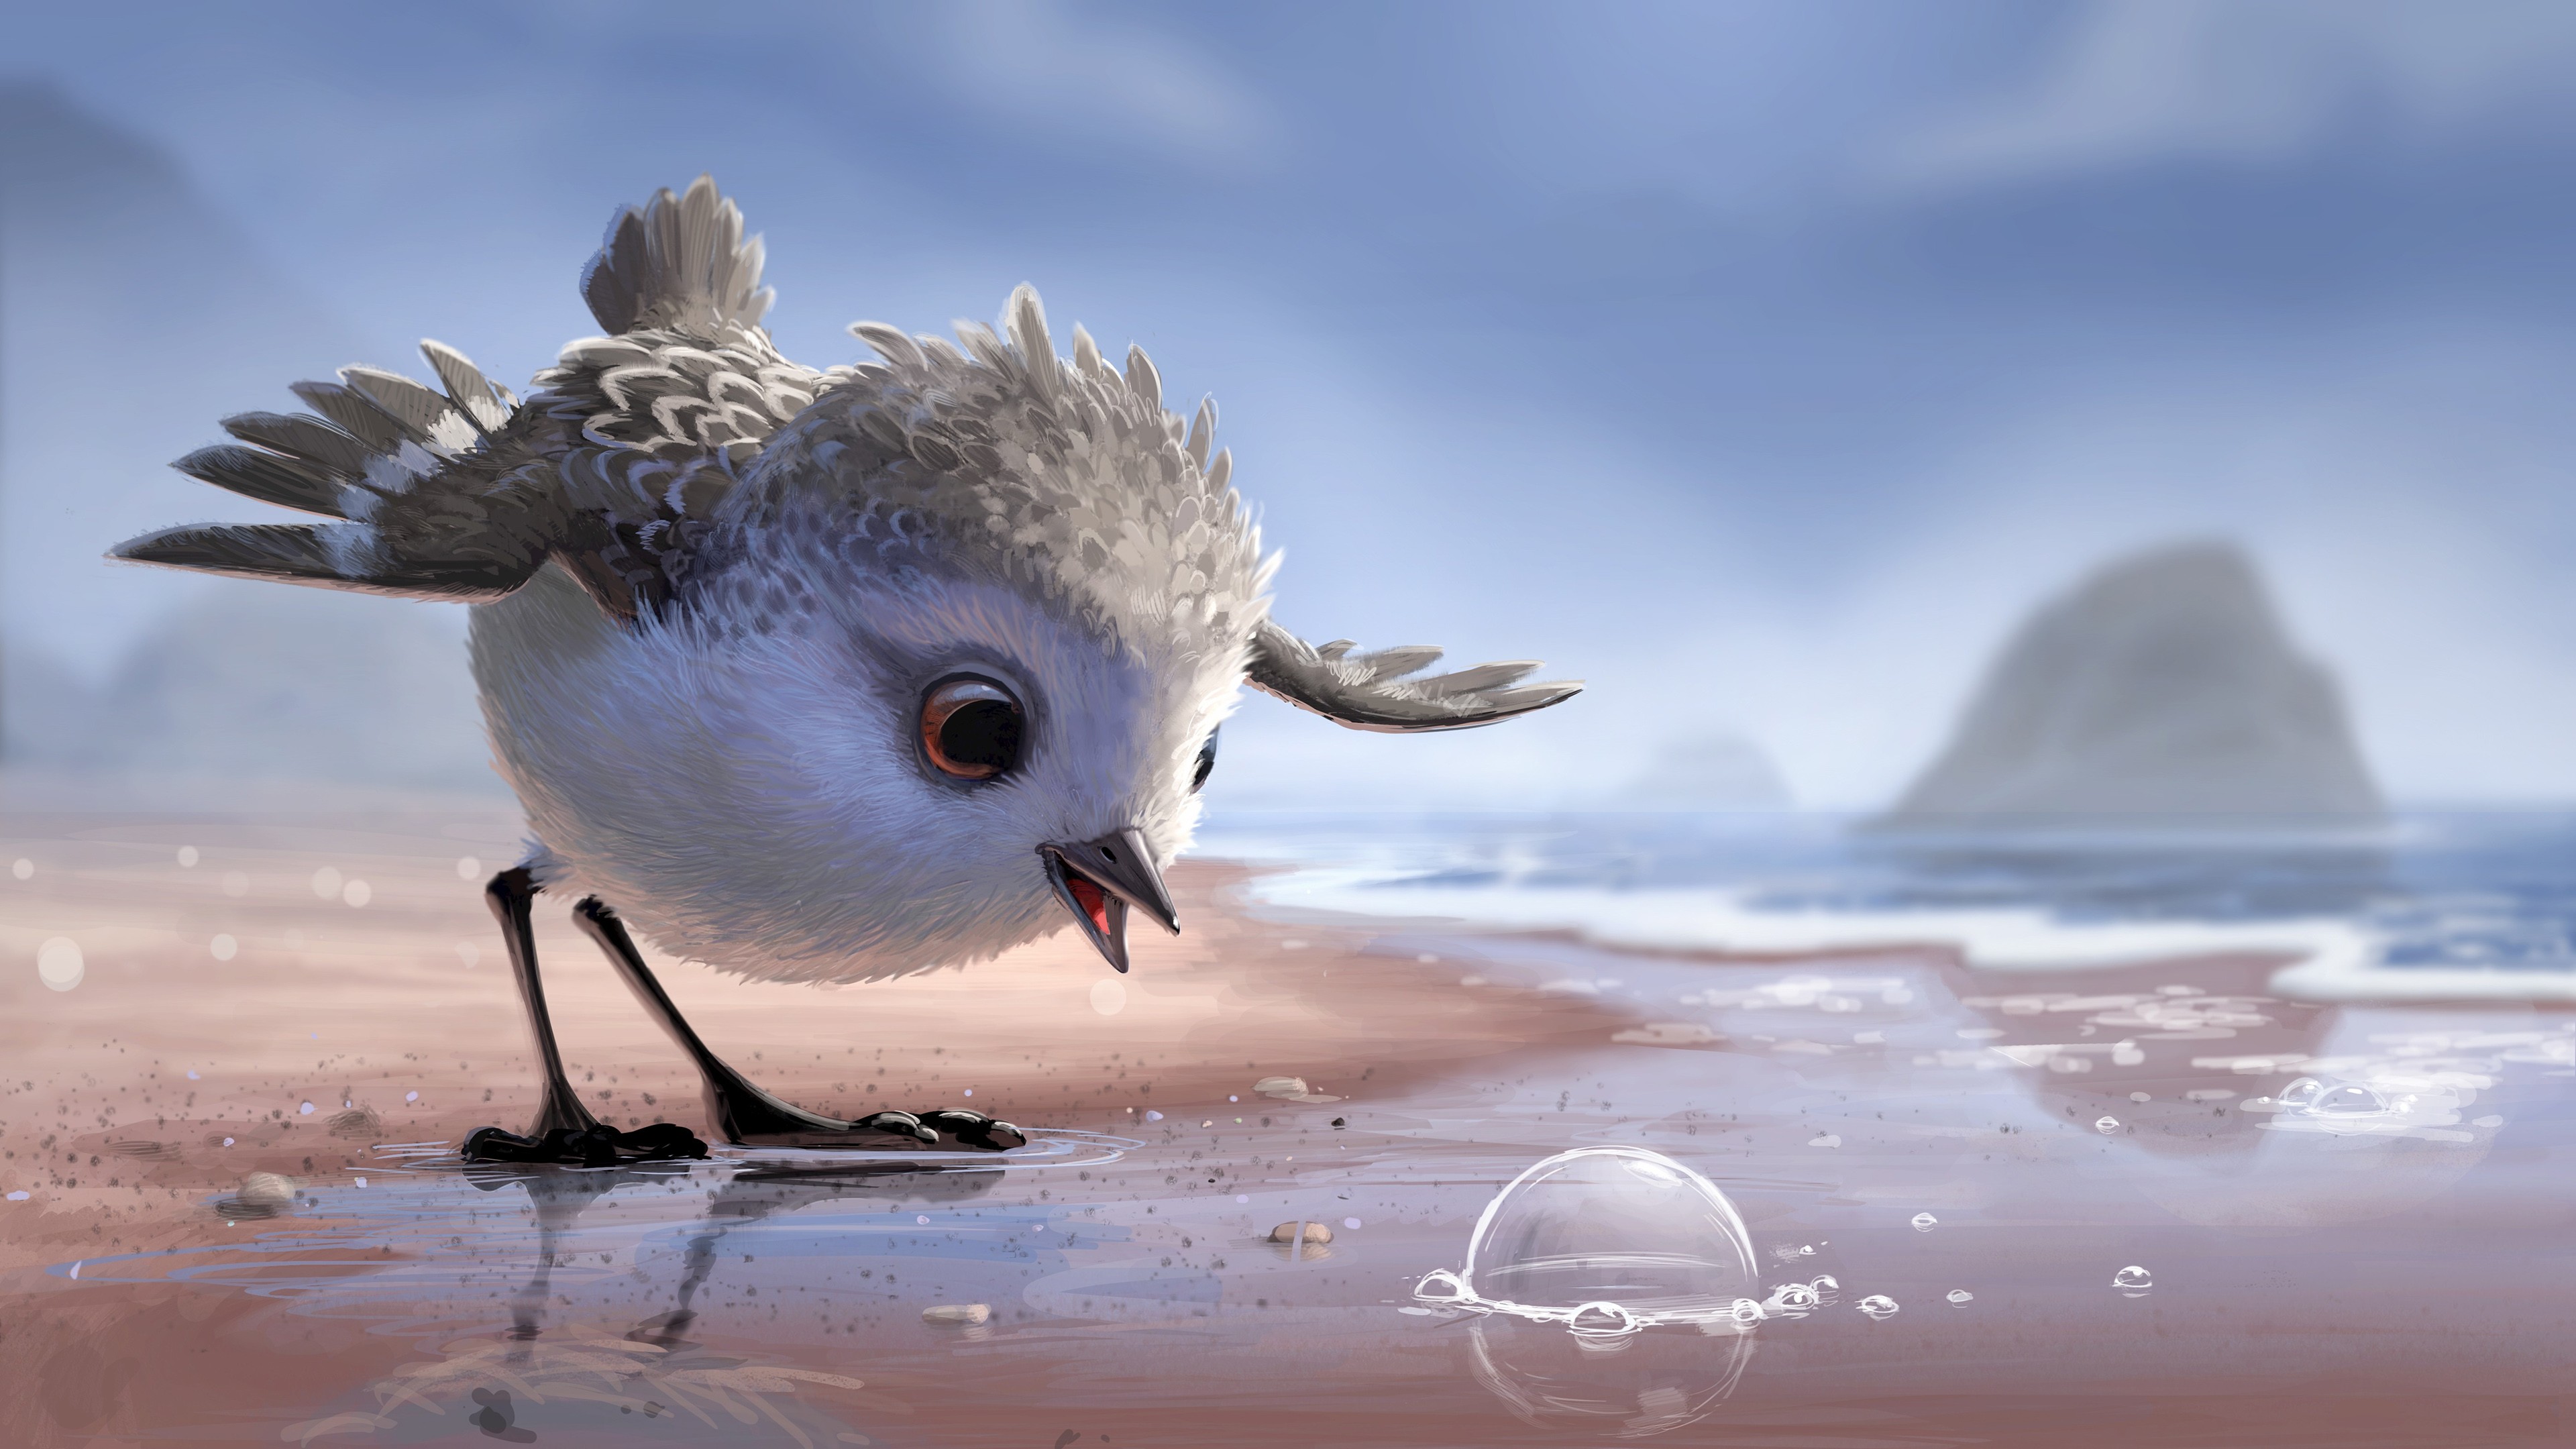 General 3840x2160 movies animated movies birds animals film stills beach wings bubbles